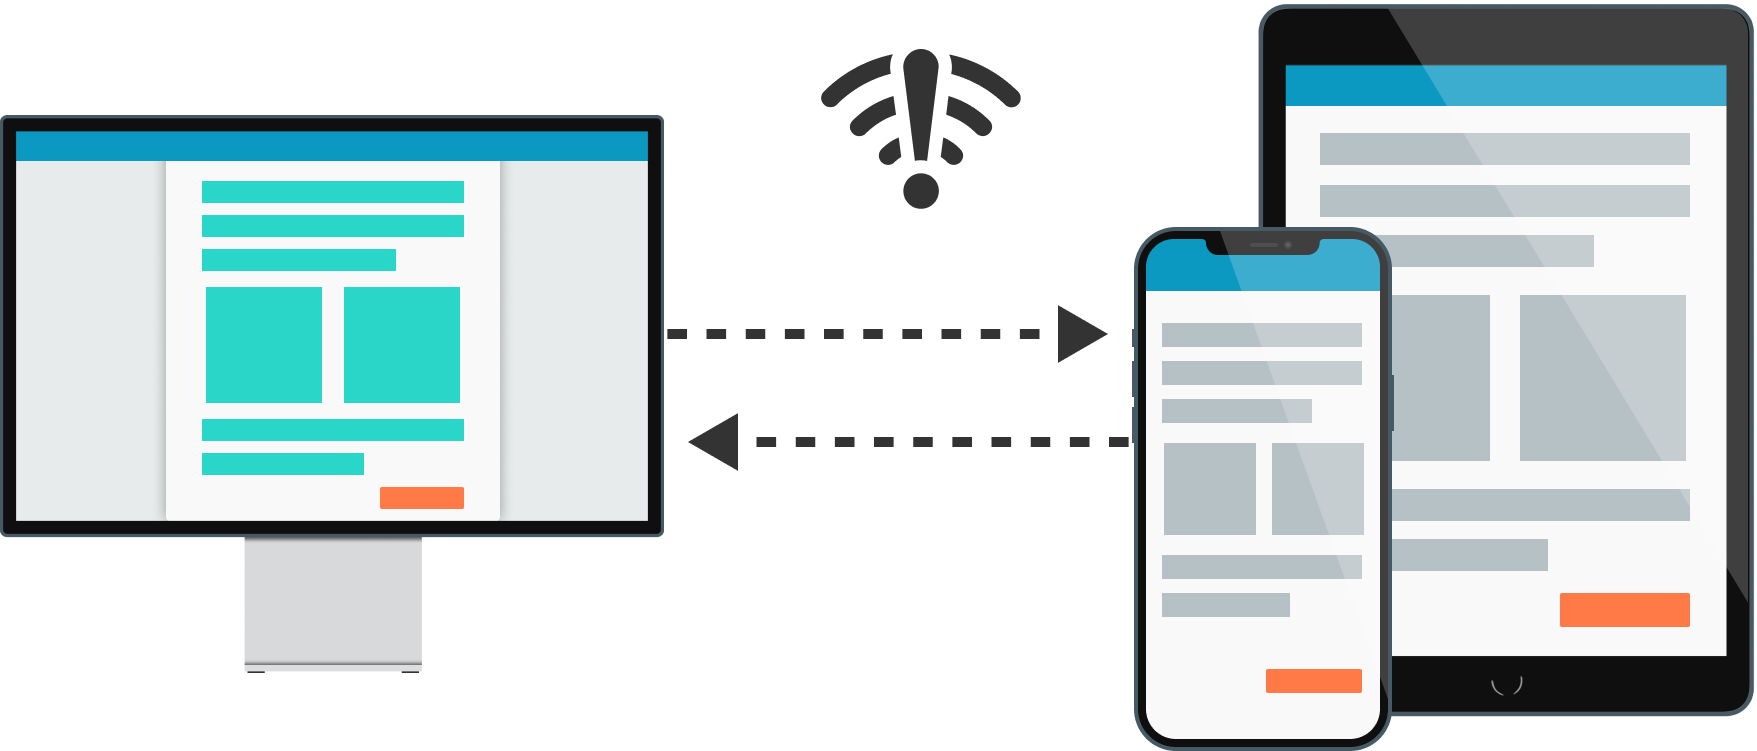 Image showing data syncing between a phone, tablet, and computer, beneath an offline symbol